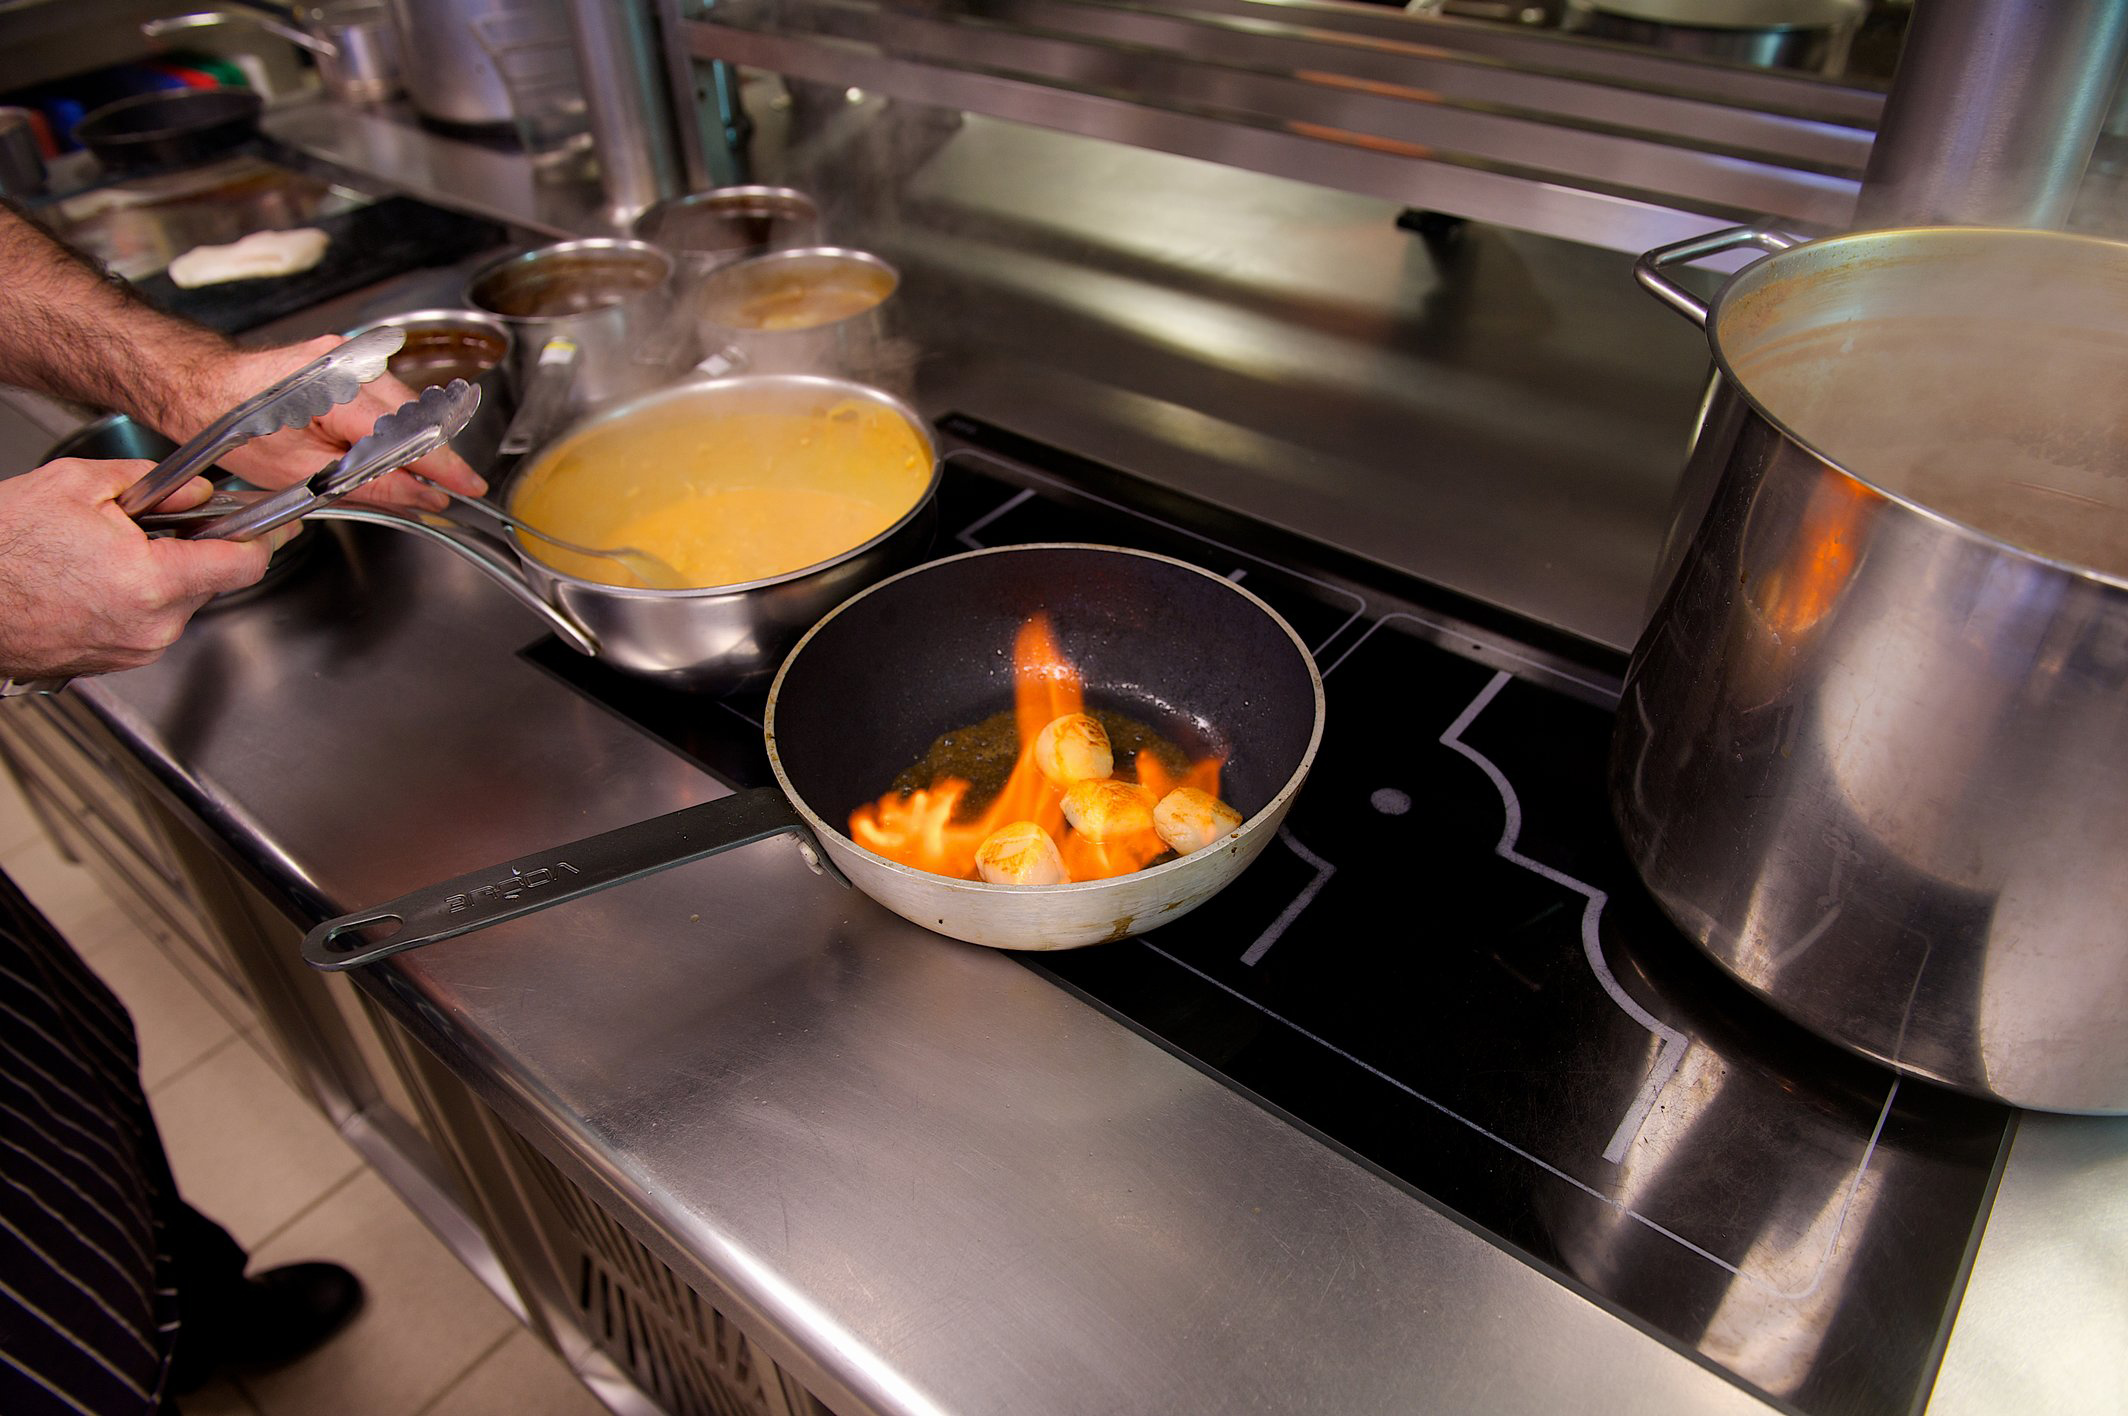 Food cooking on an electric induction hob